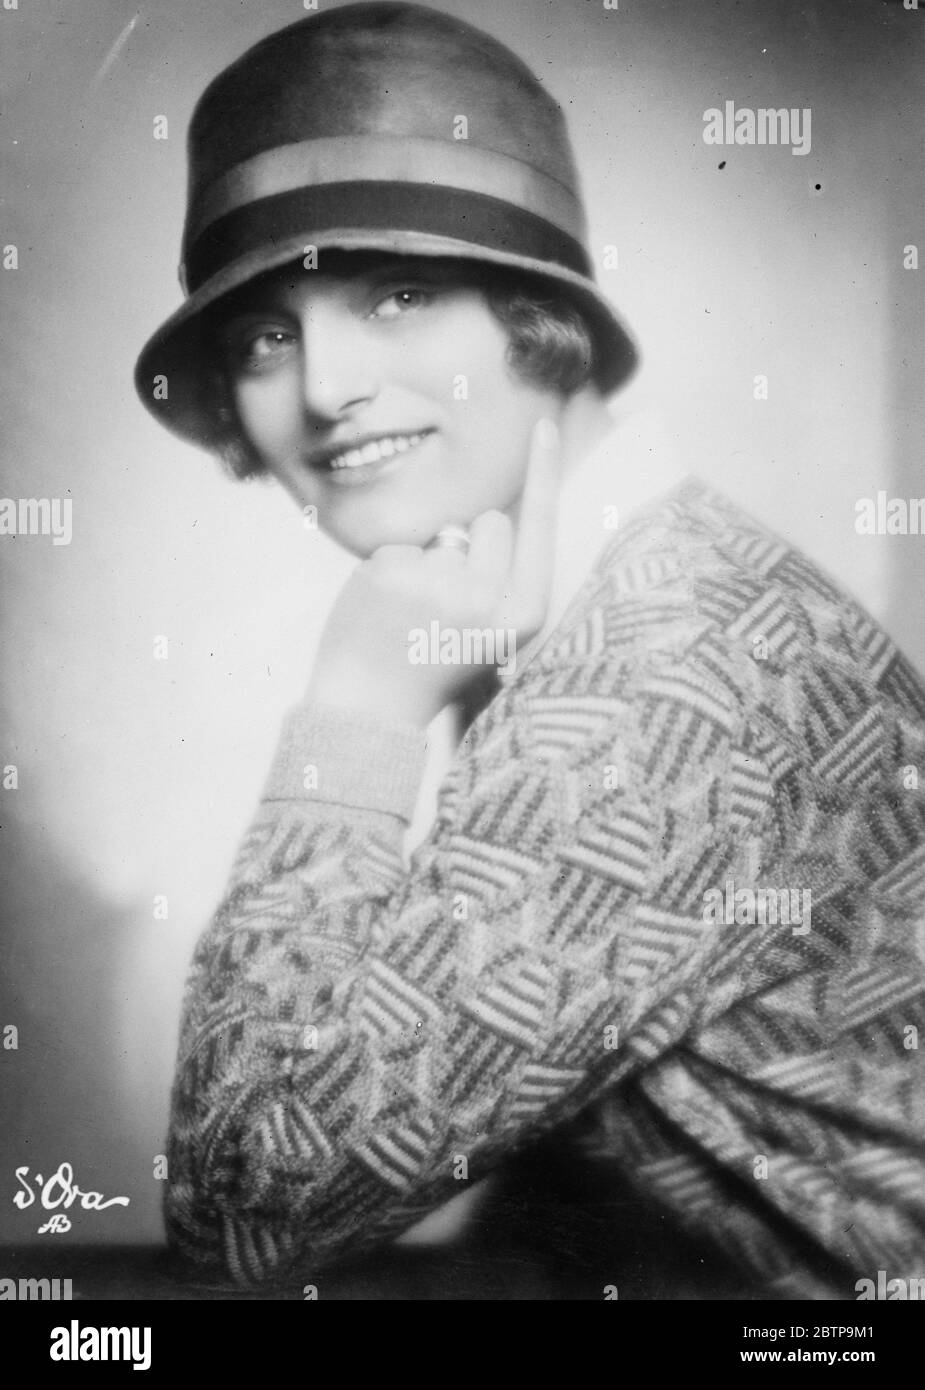 Champion woman steeplechase rider . Frau Schmidt Melius , who a few days ago at Erfurt , won a handicap steeplechase when riding her own horse against professional male jockeys . 18 Februay 1927 Stock Photo